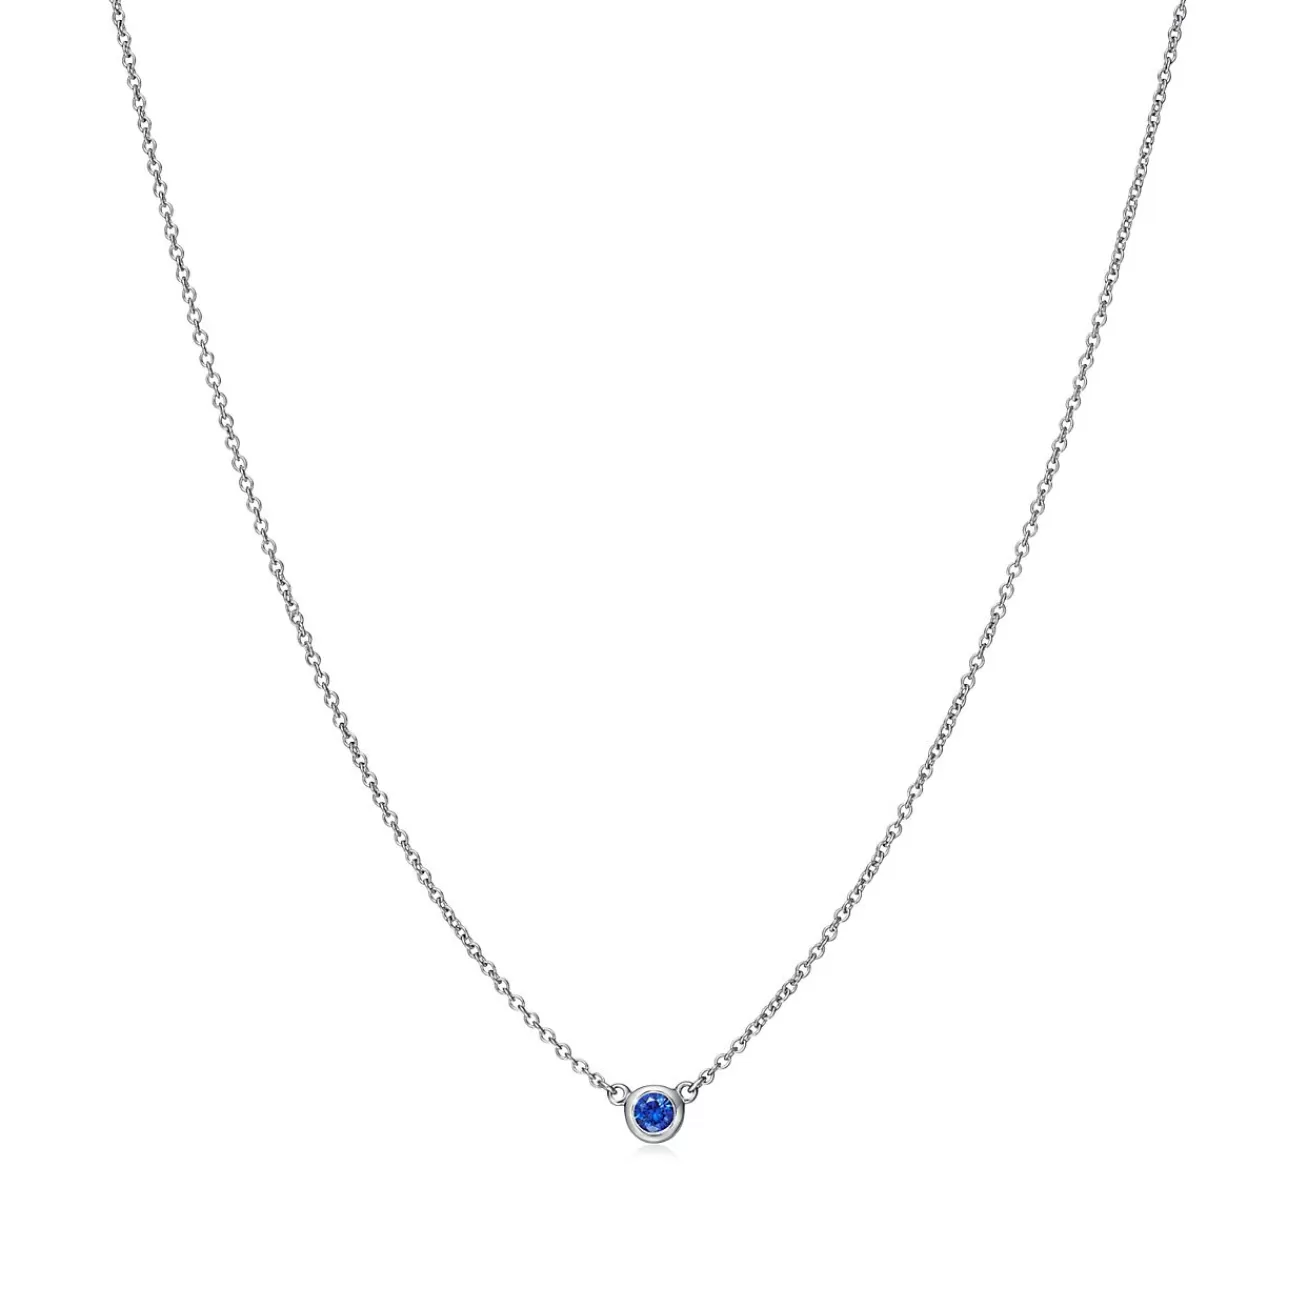 Tiffany & Co. Elsa Peretti® Color by the Yard Pendant in Platinum with a Sapphire | ^ Necklaces & Pendants | Platinum Jewelry